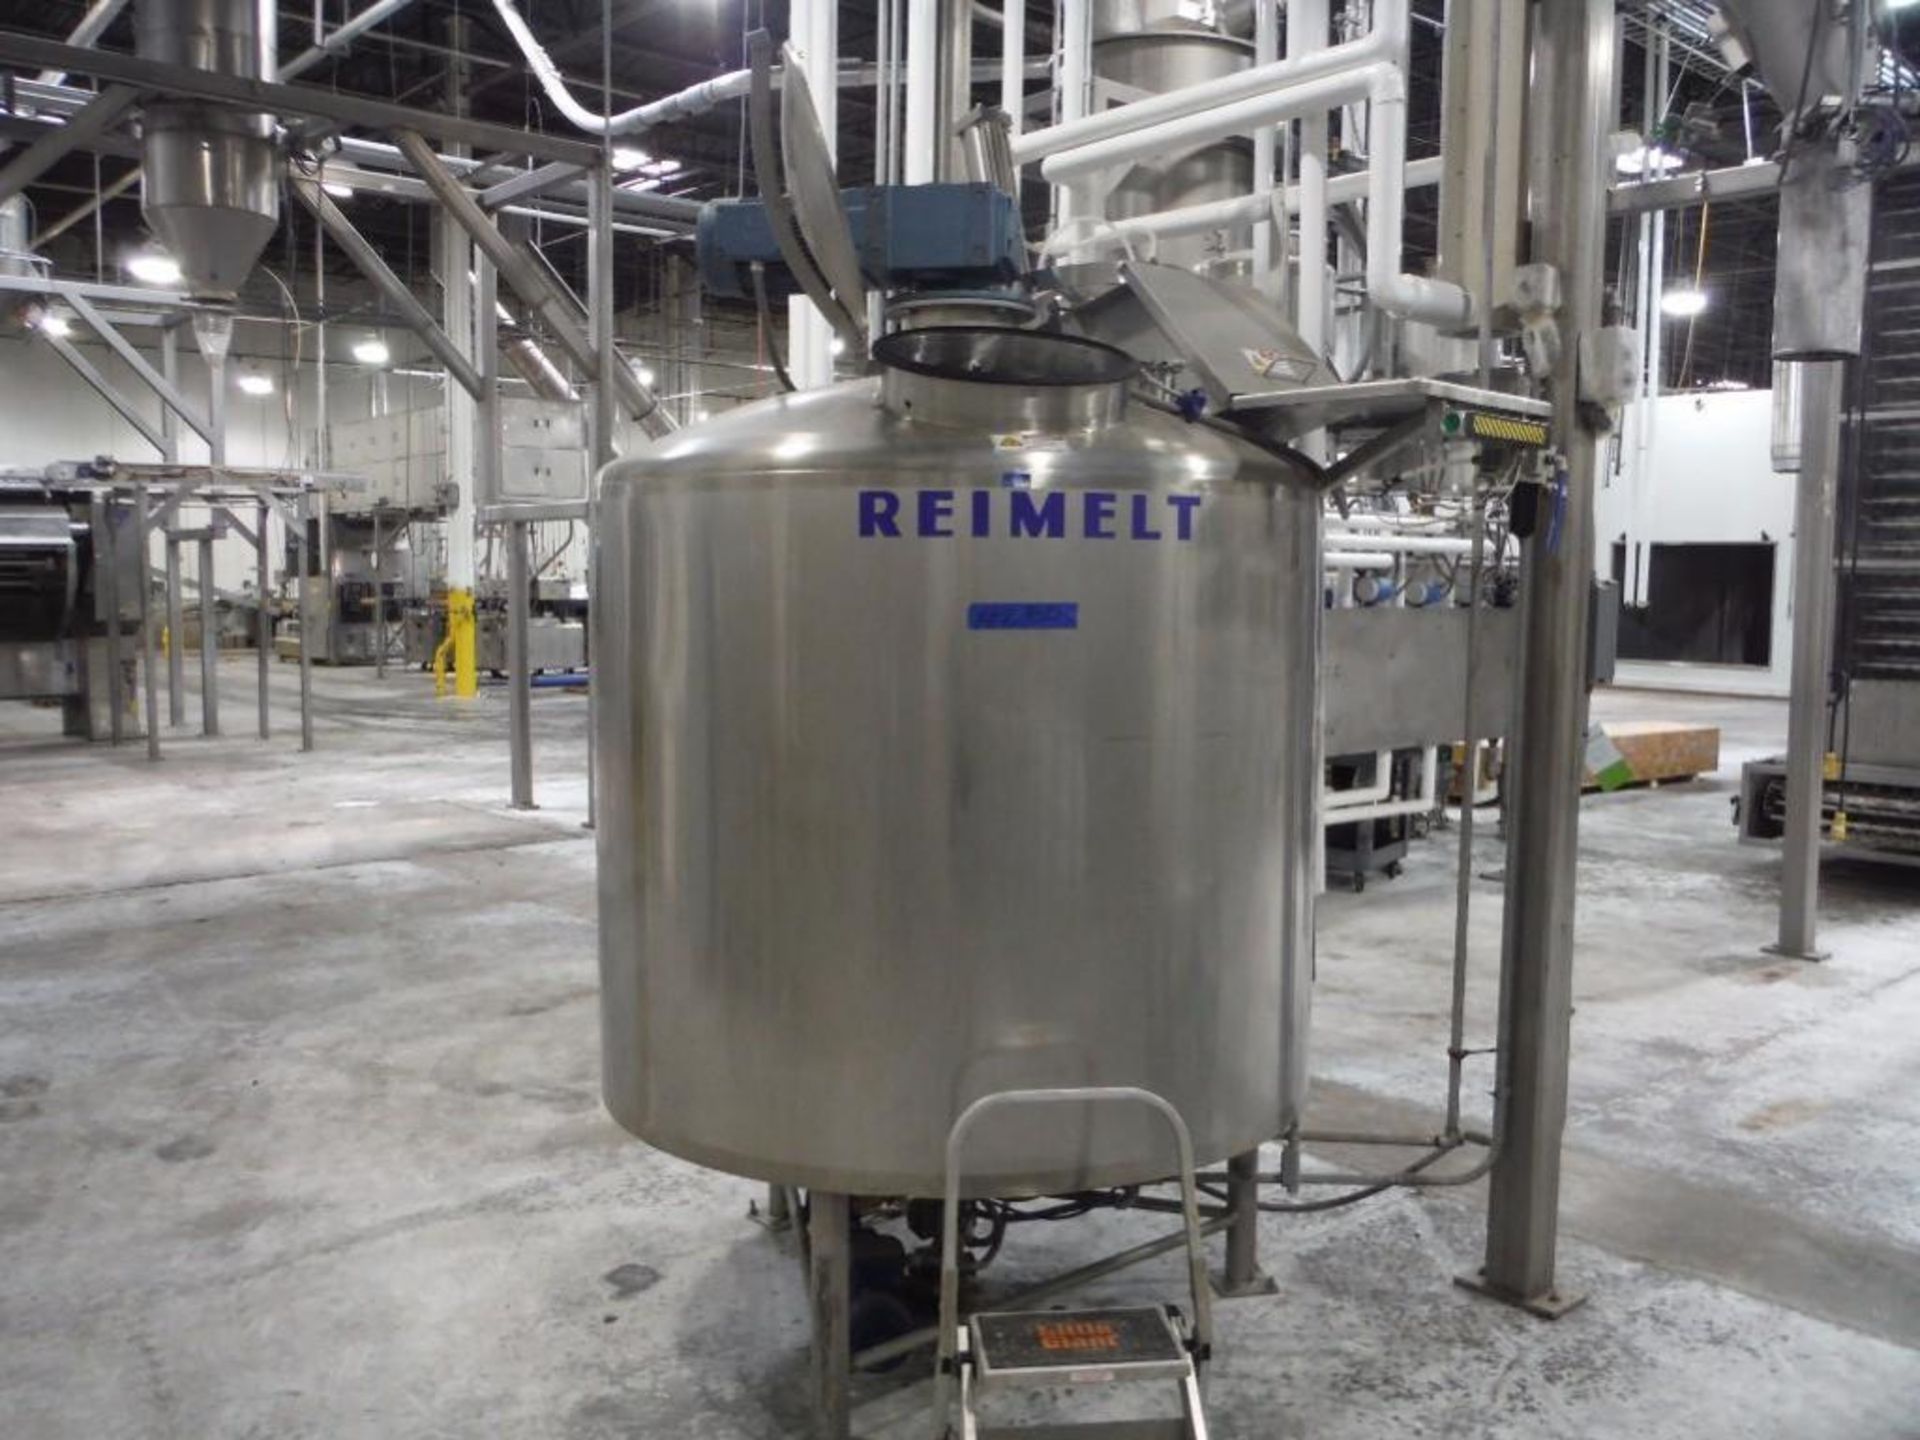 Reimelt SS jacketed mix tank, 65 in. diam x 55 in. tall, 3/4 sweep, single agitation, flat bottom /